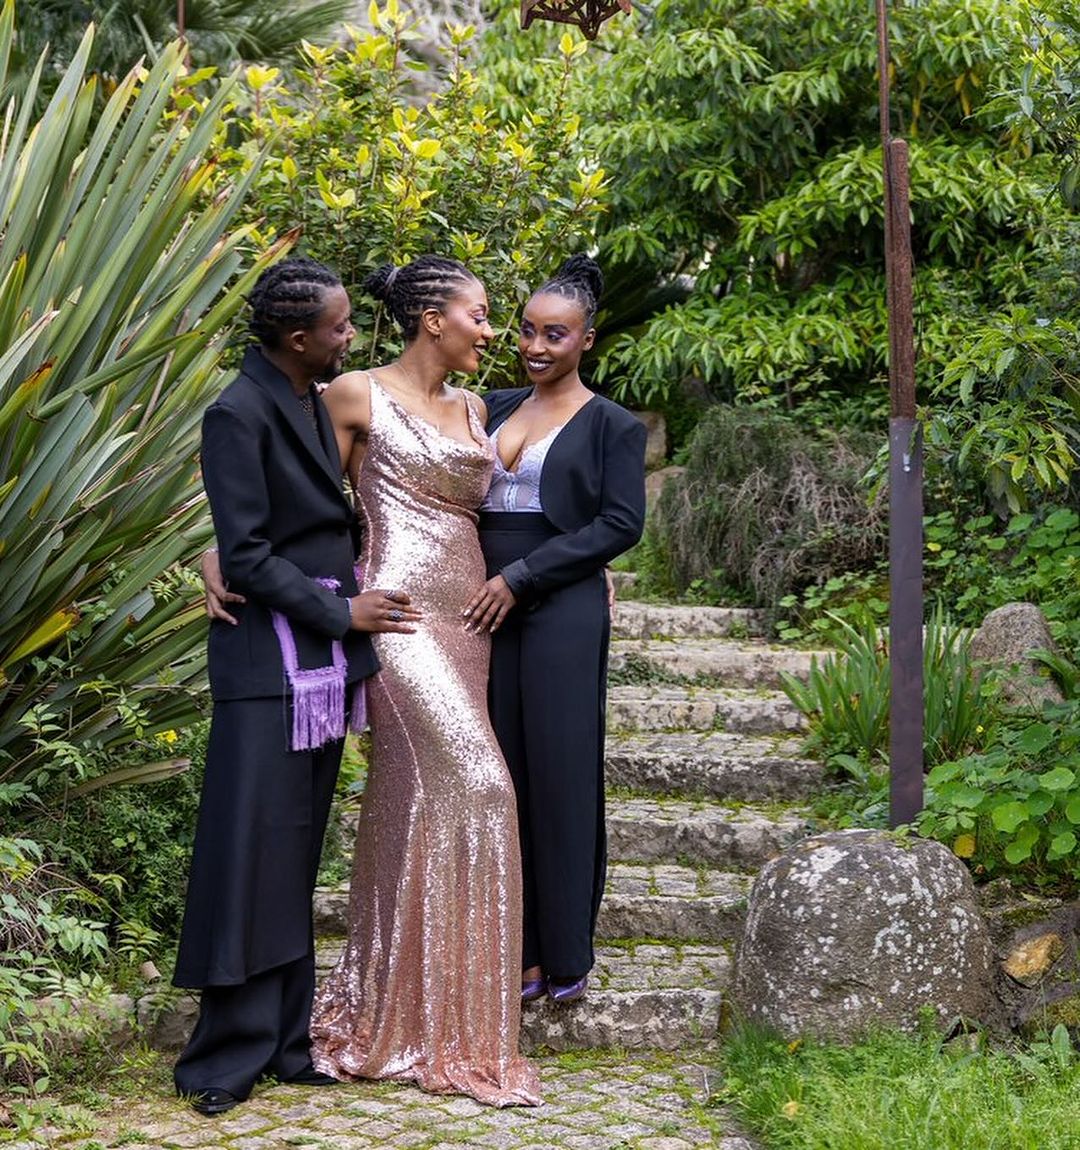 Mixed reactions as Nigerians in a 'polyamorous relationship' openly celebrate their love